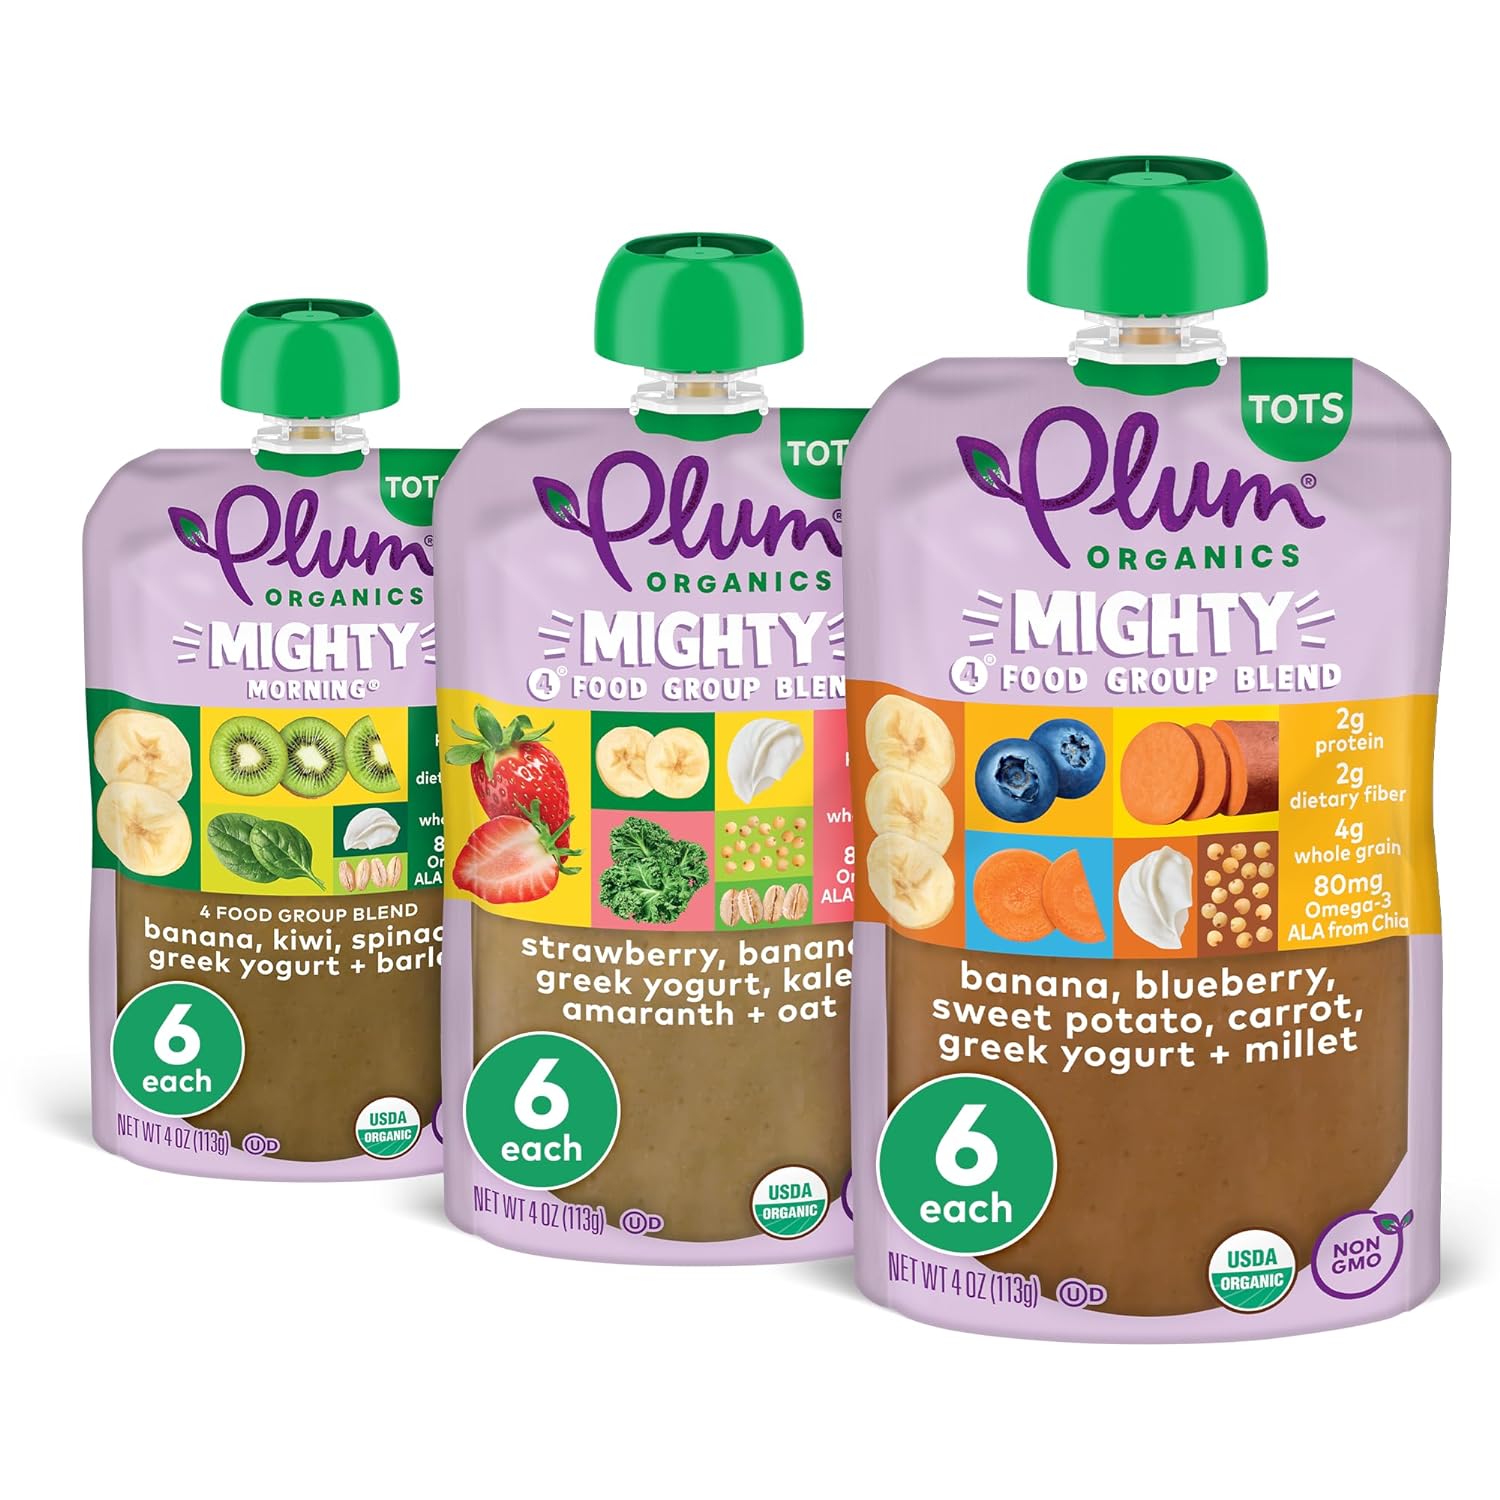 Plum Organics Mighty 4 and Mighty Morning Organic Toddler Food